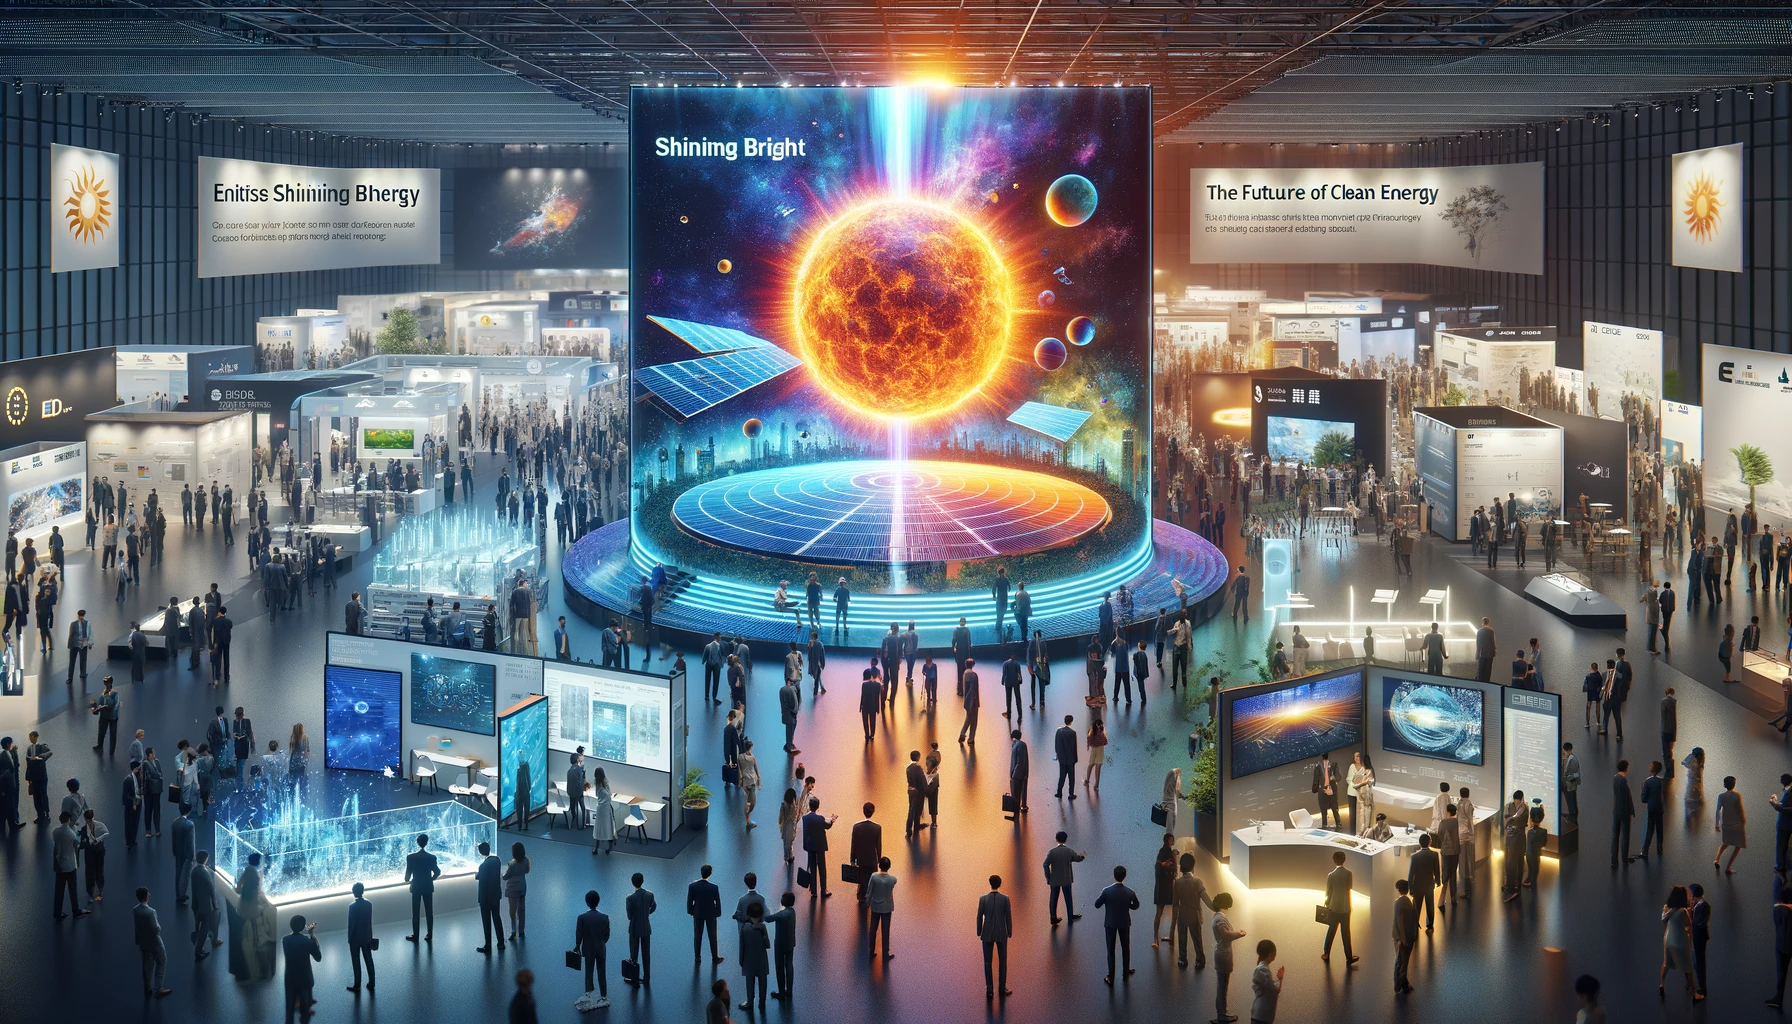 A bustling solar power conference with attendees exploring interactive displays of advanced solar technologies. A holographic sun with orbiting solar panels is featured in the center.